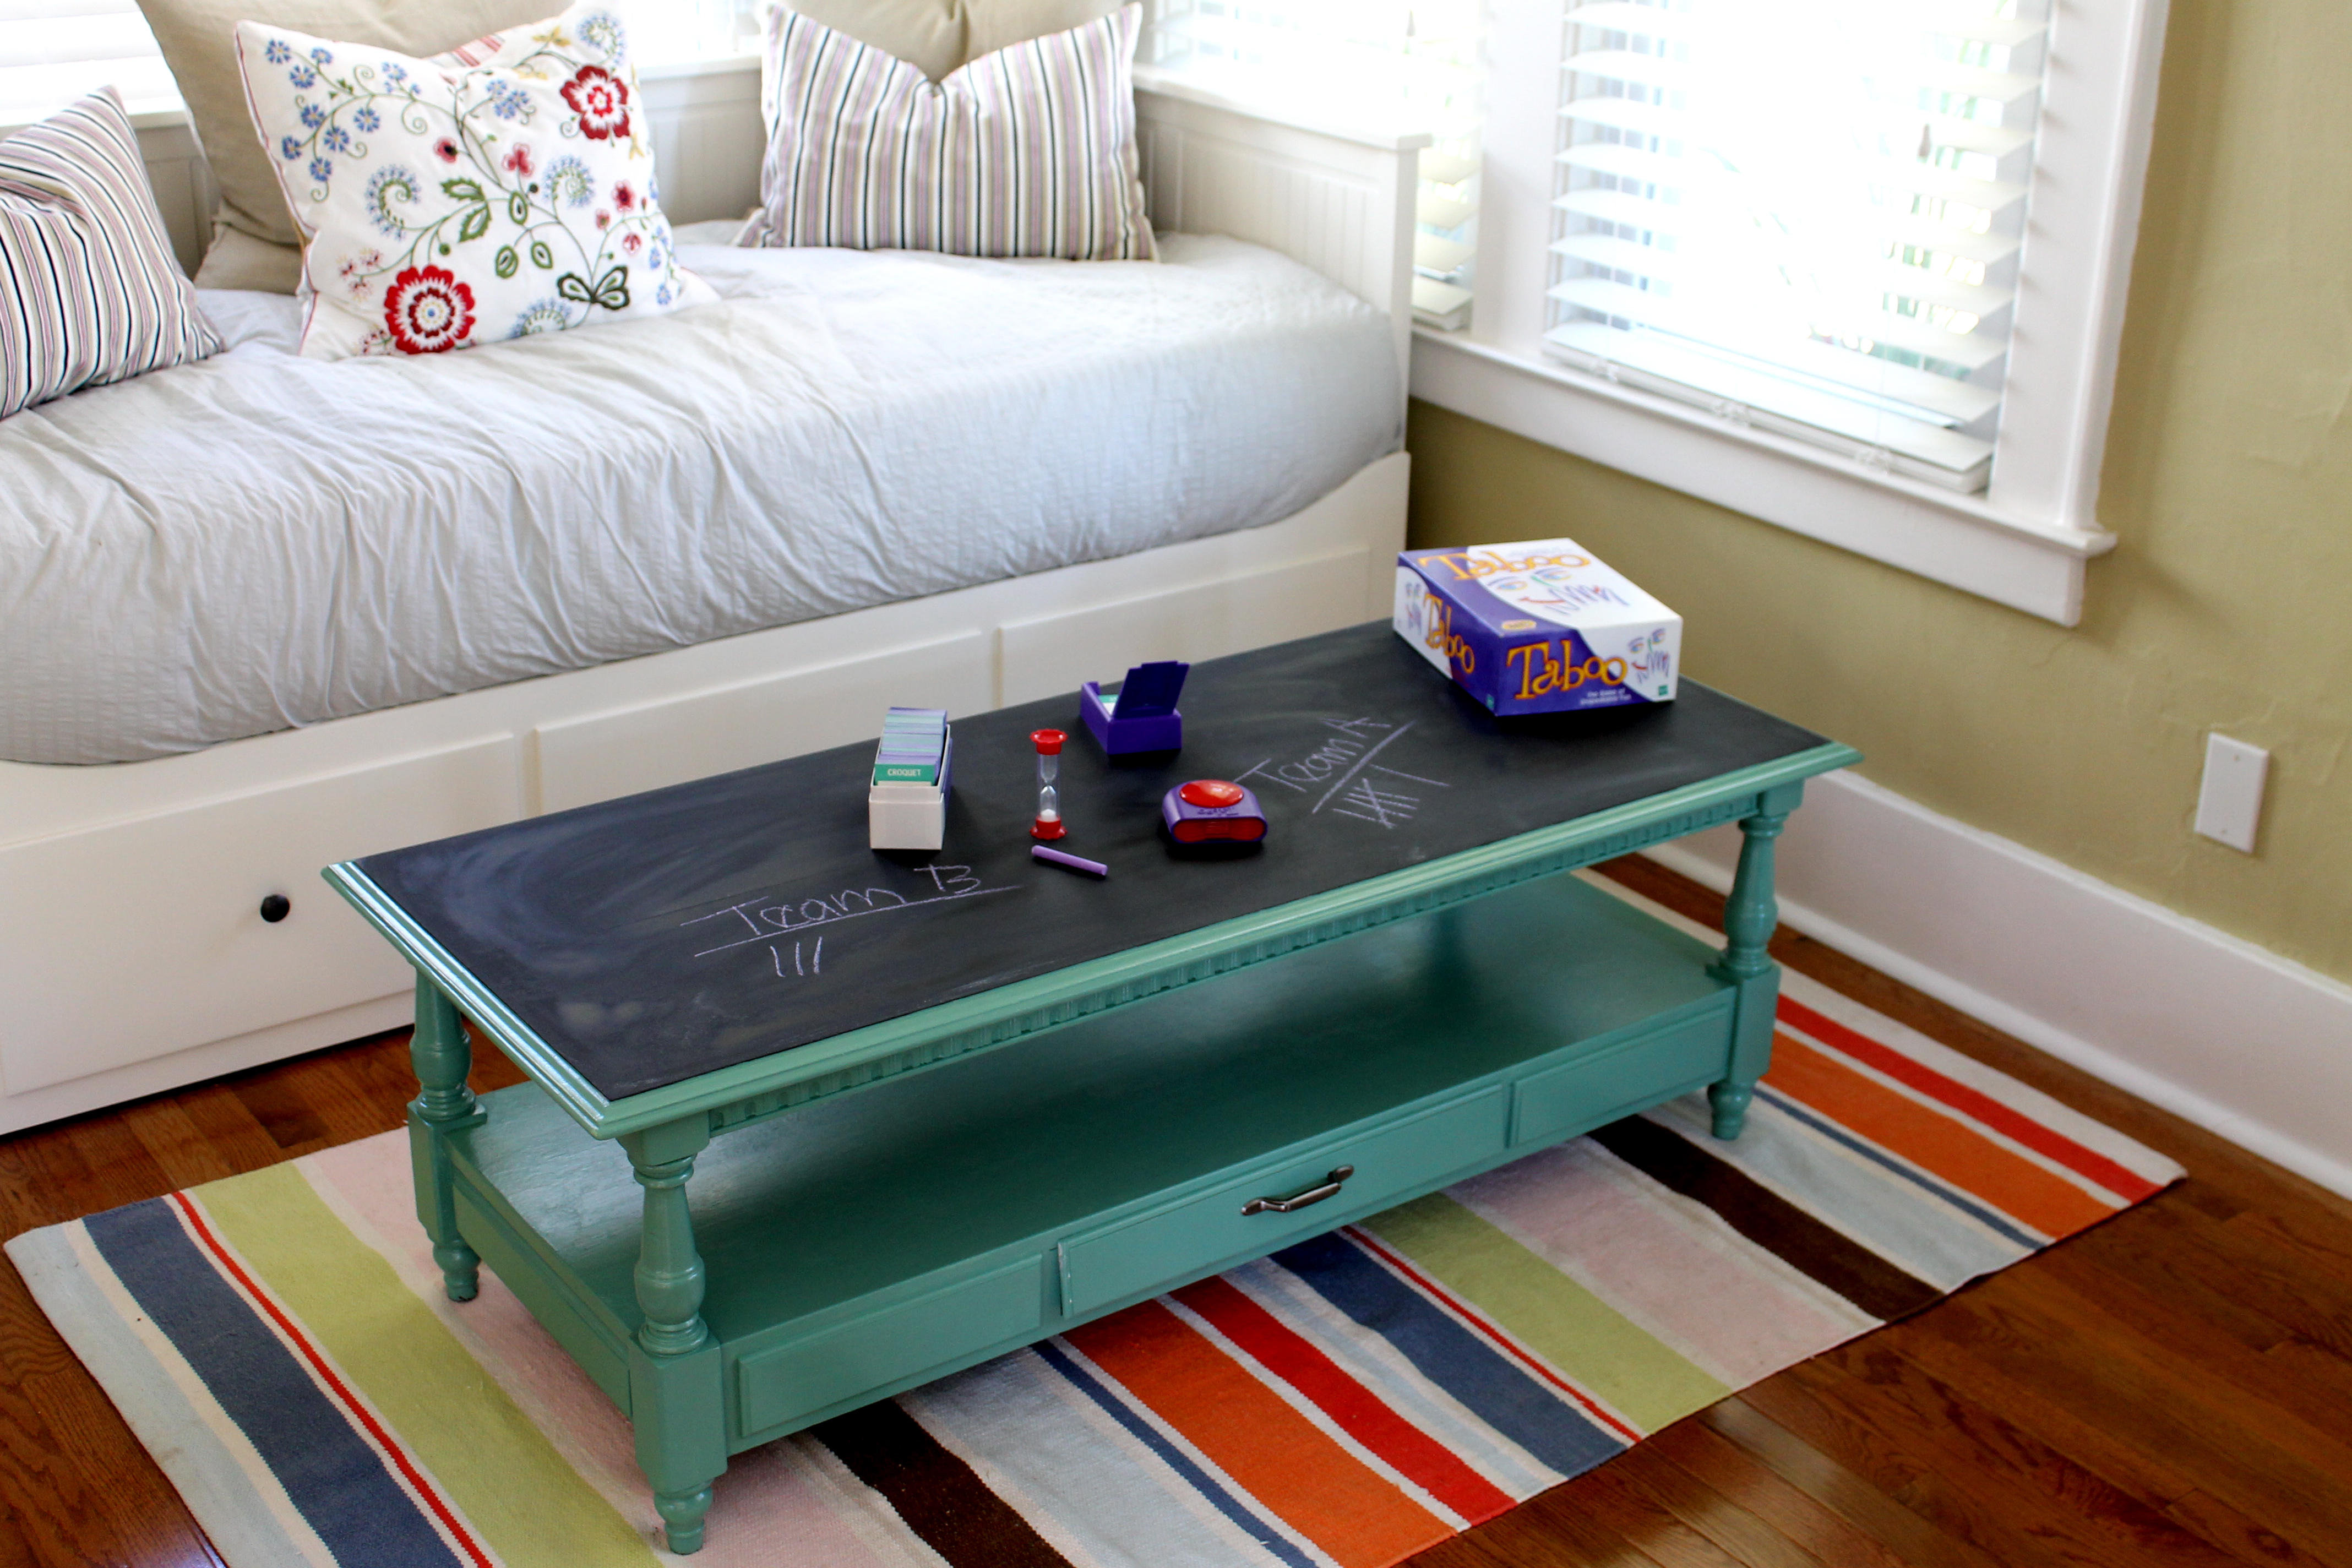 Coffee table with game - How to Decorate a Blank Wall